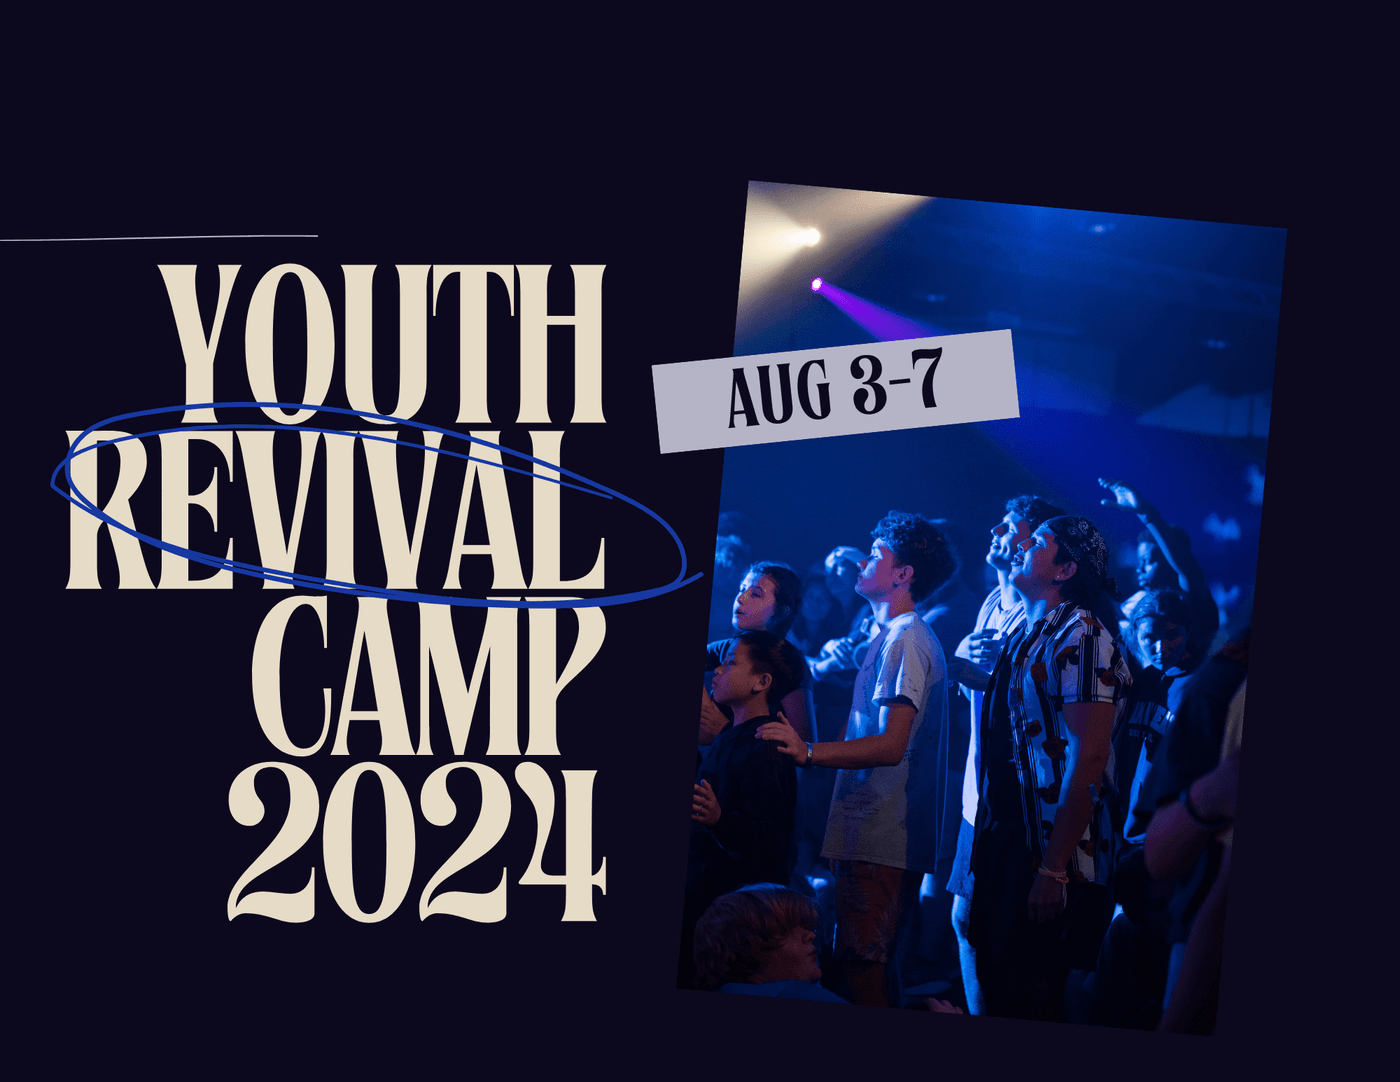 Youth Revival Camp 2024